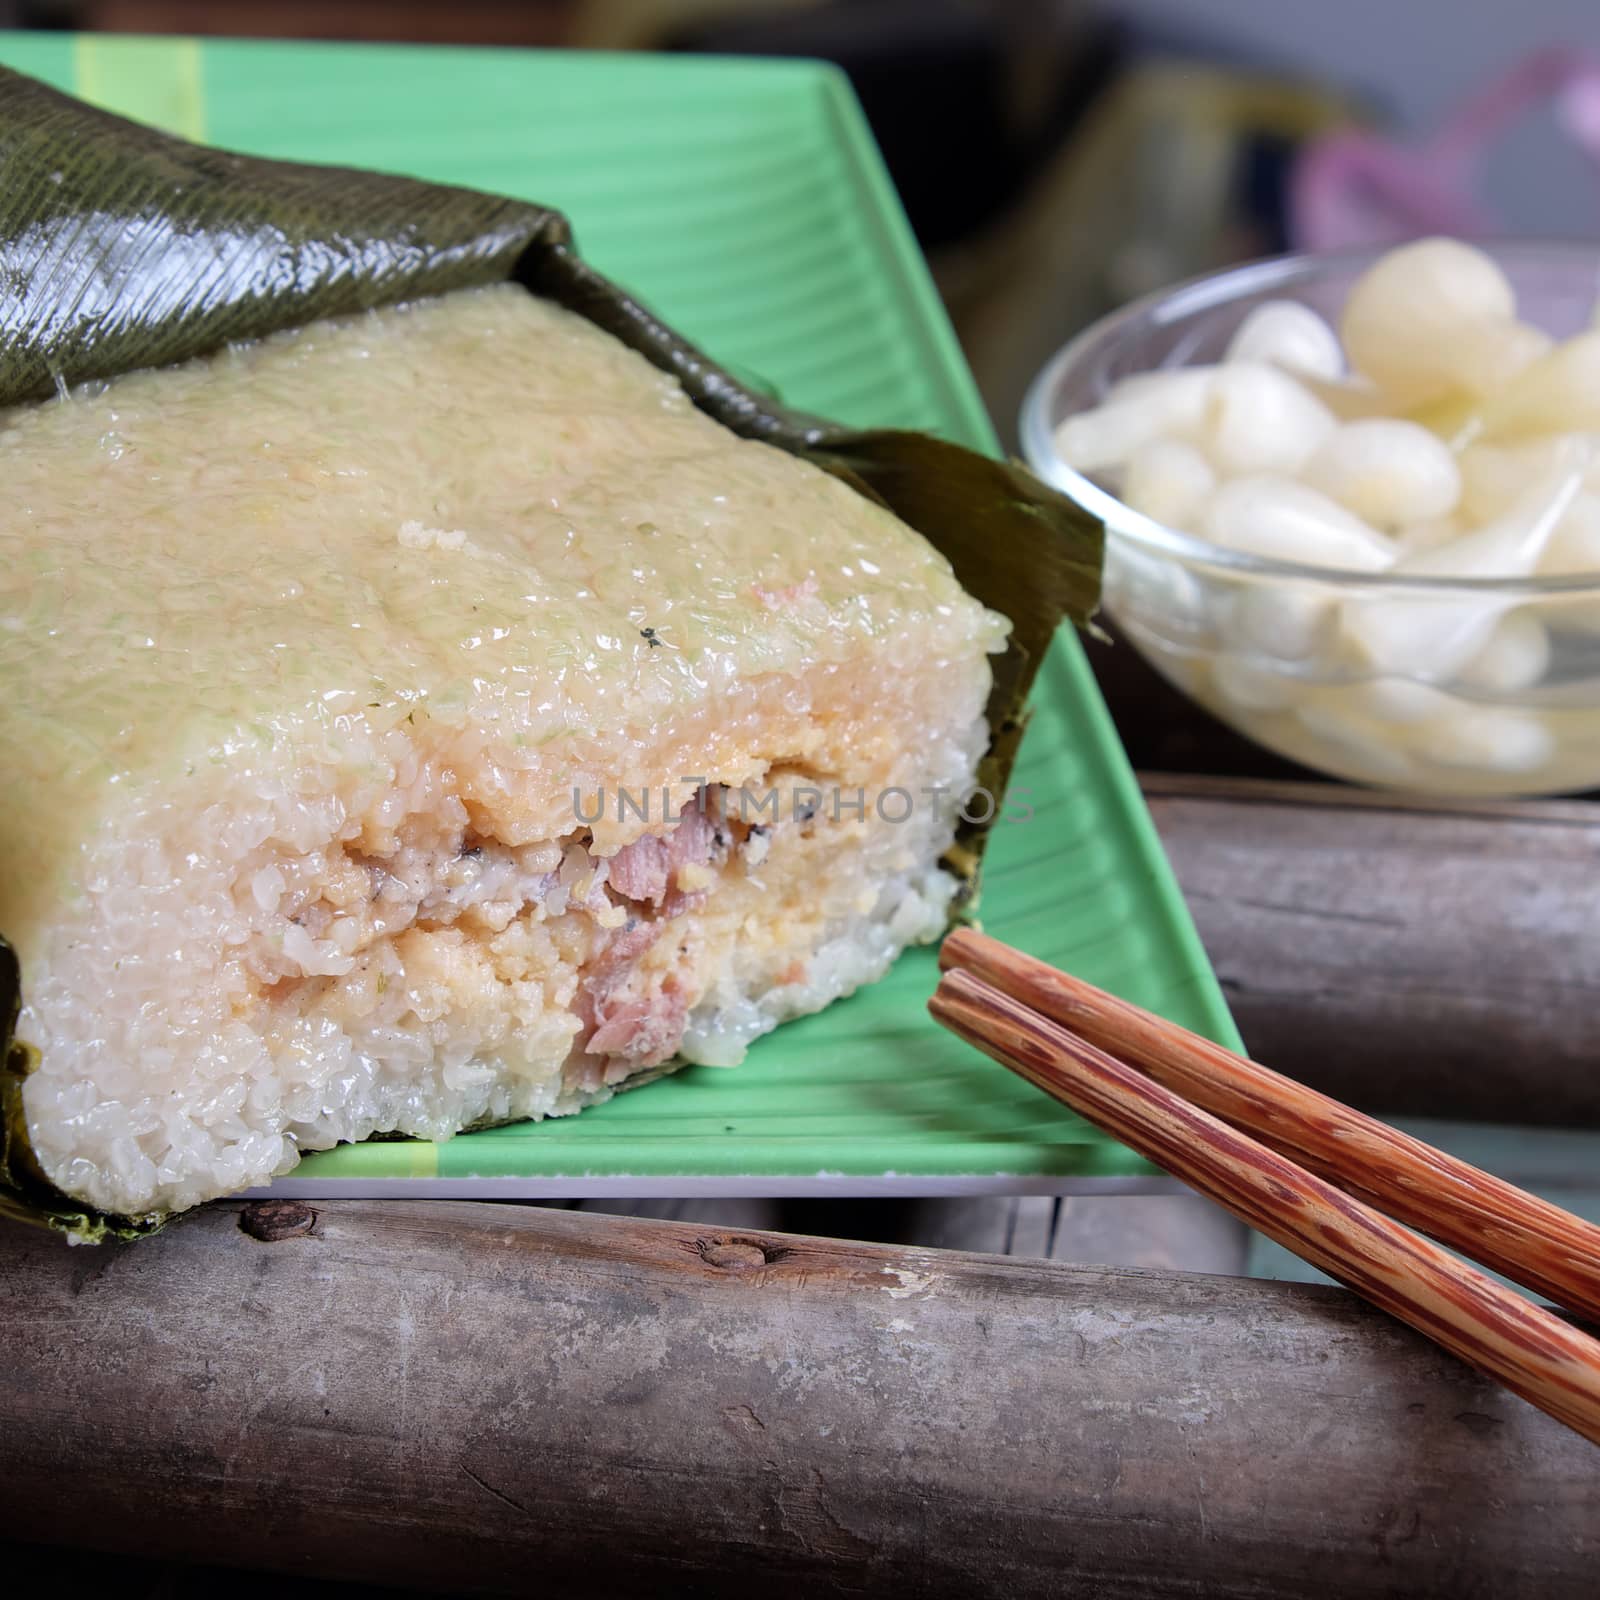 Vietnamese food for Tet holiday in spring, banh chung is traditional food on lunar new year, a rice cake stuffed with pork, green bean, is tradition culture in spring